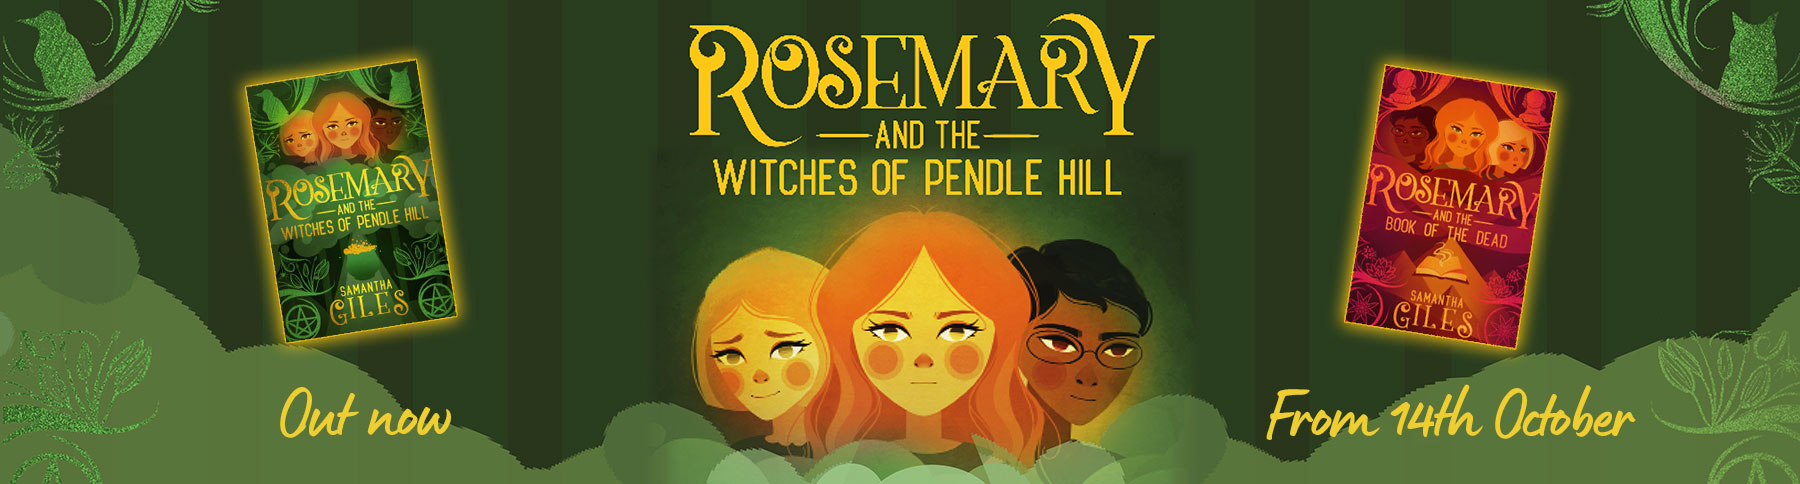 Rosemary and the Pendle Witches Banner